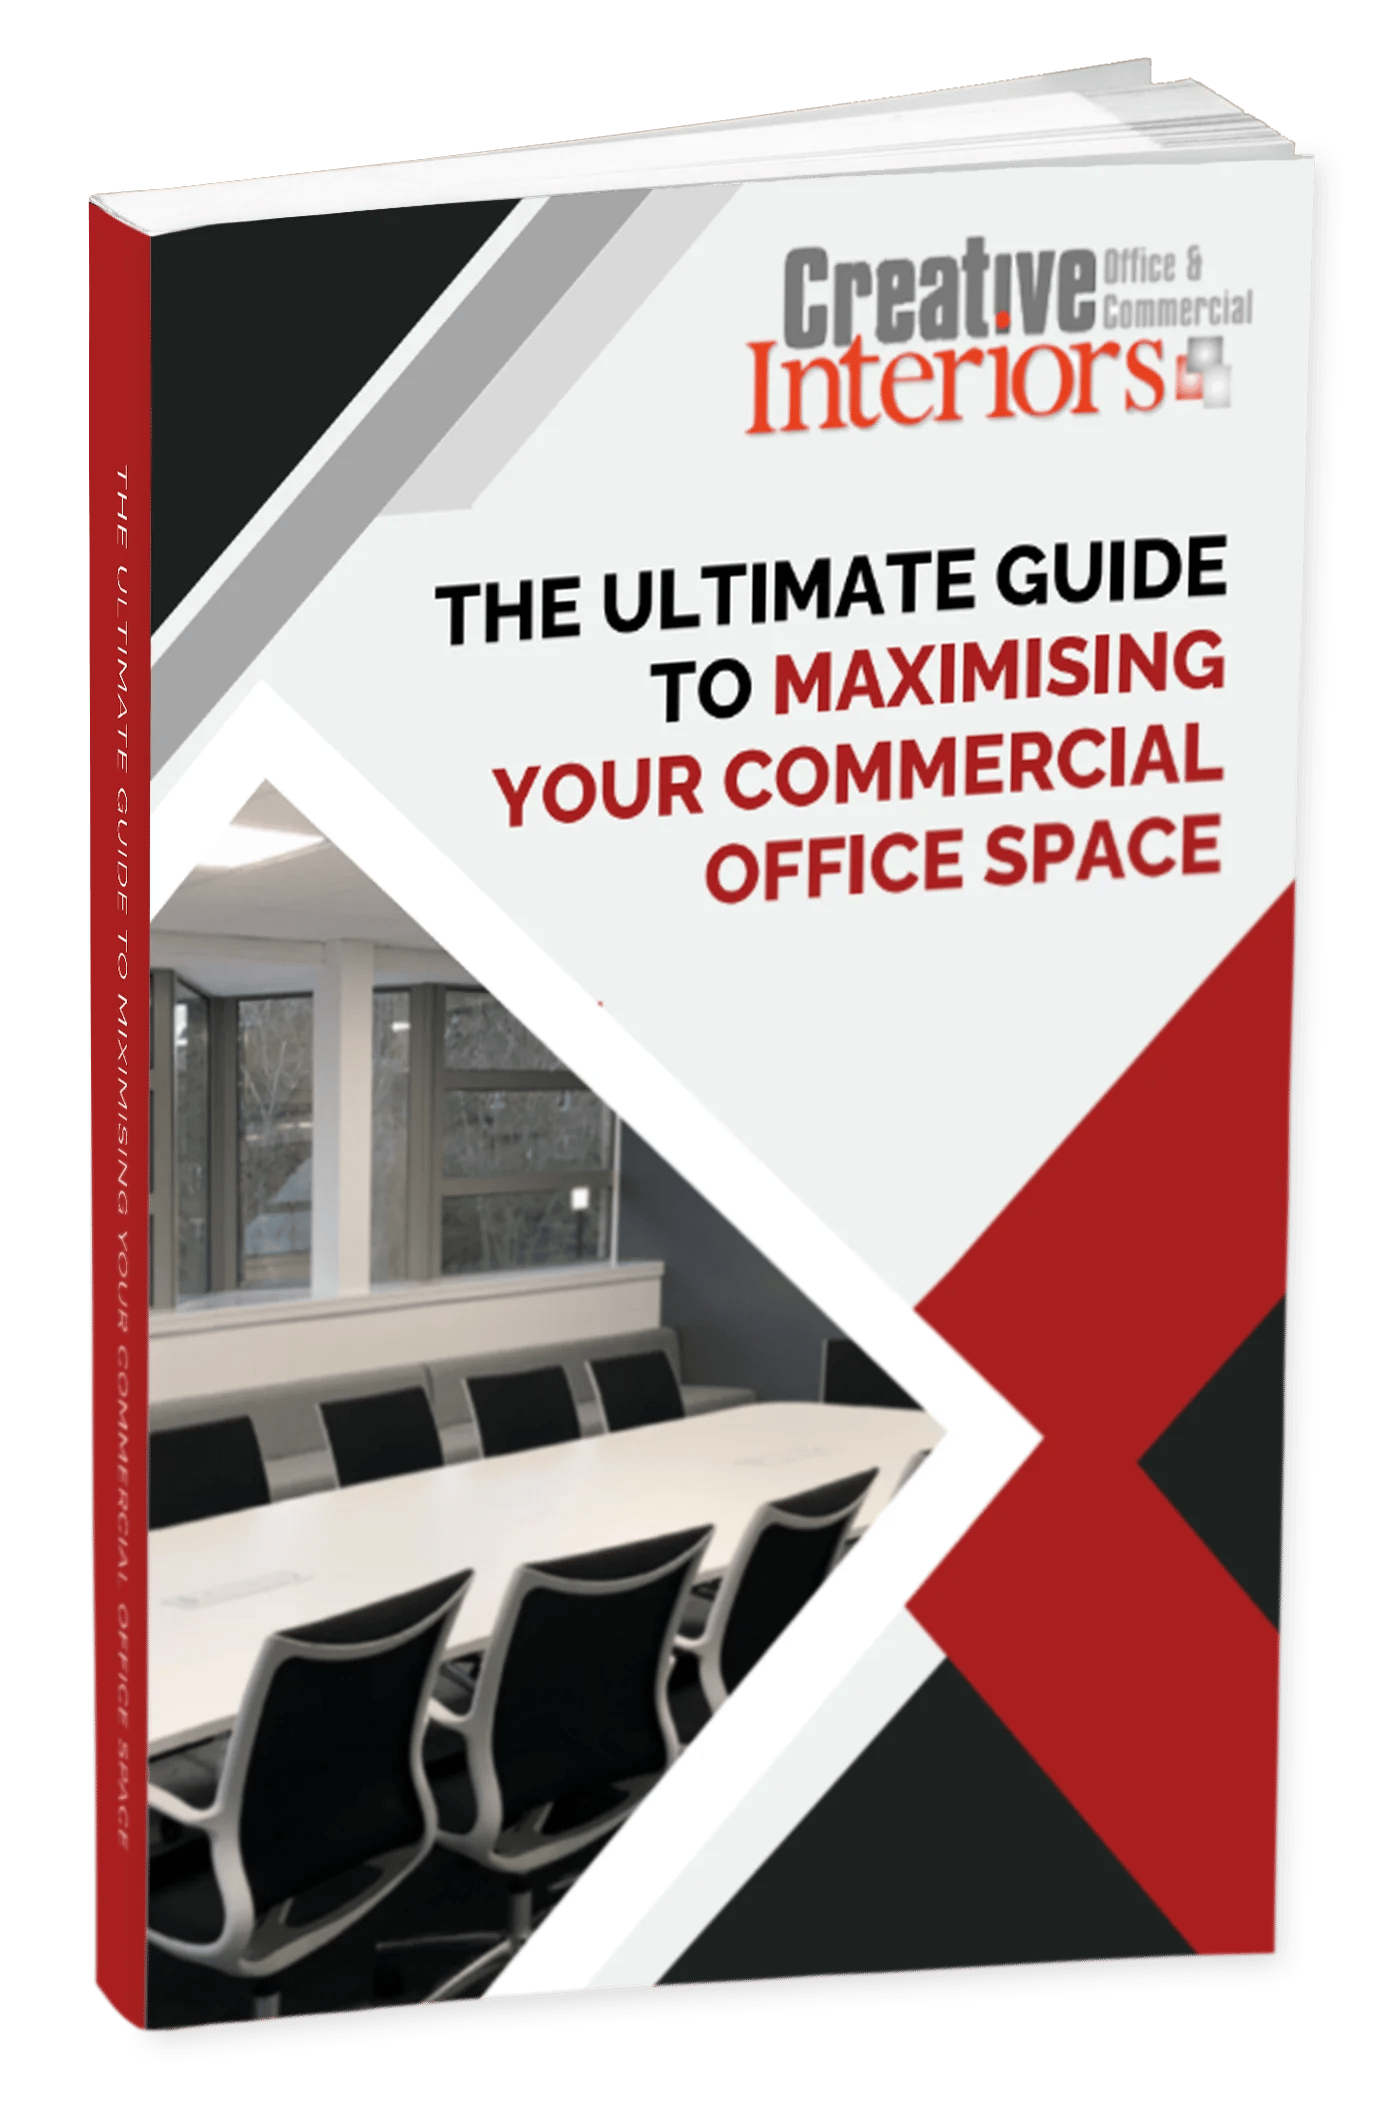 The Ultimate Guide To Maximising Your Commercial Office Space